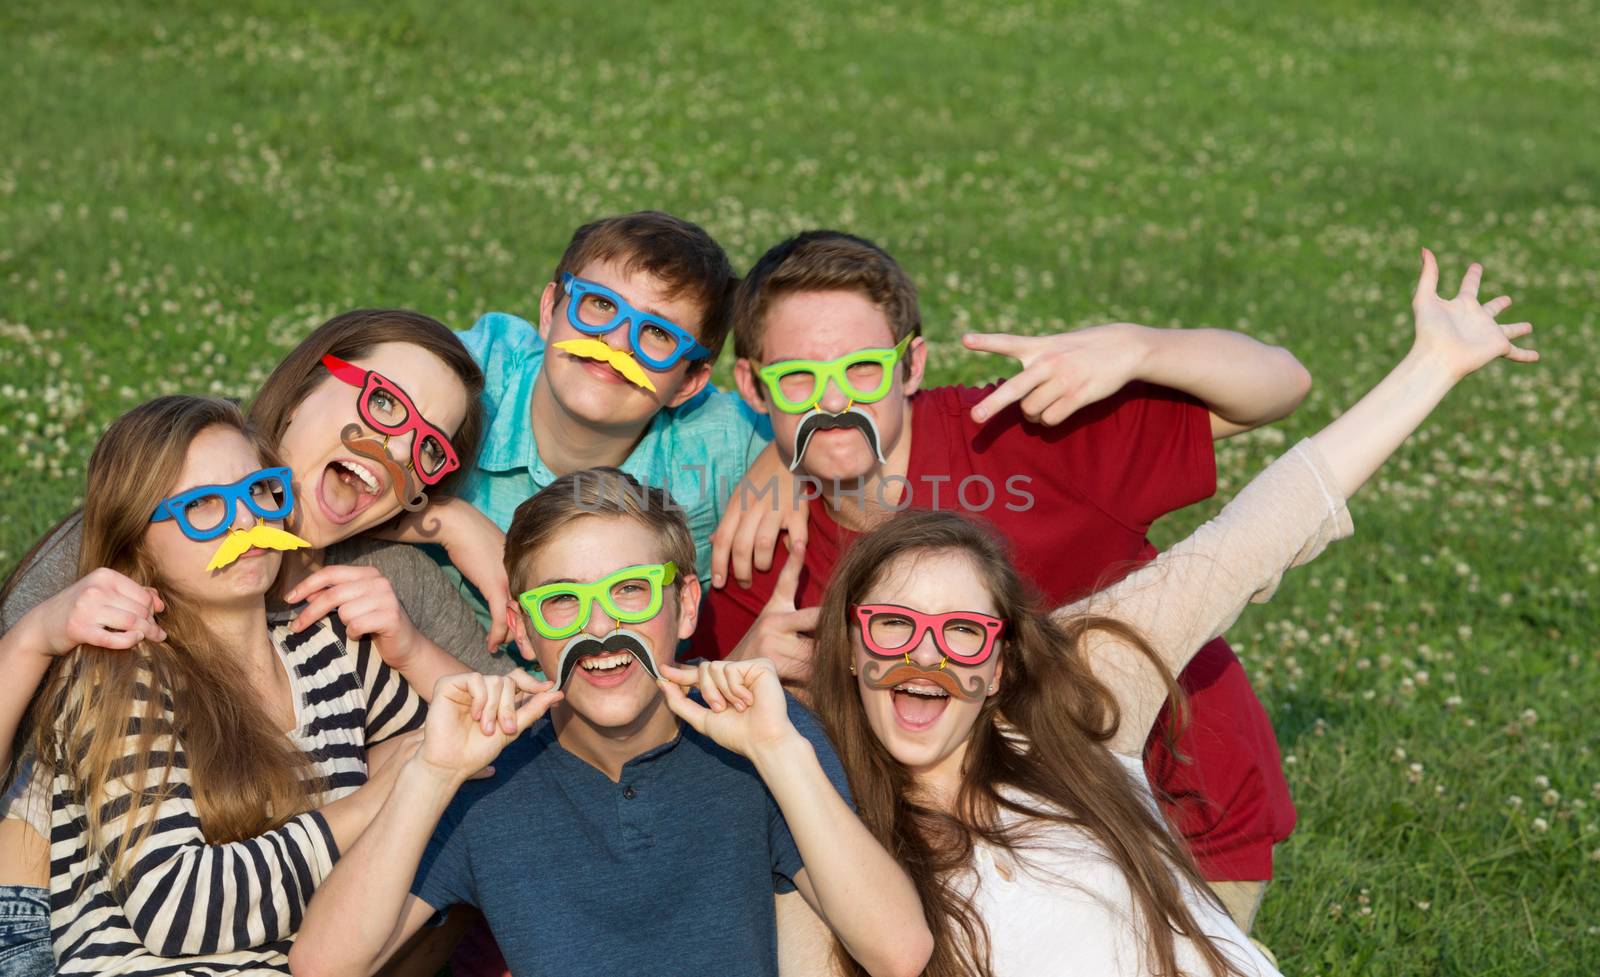 Happy group of five teenagers in silly costume